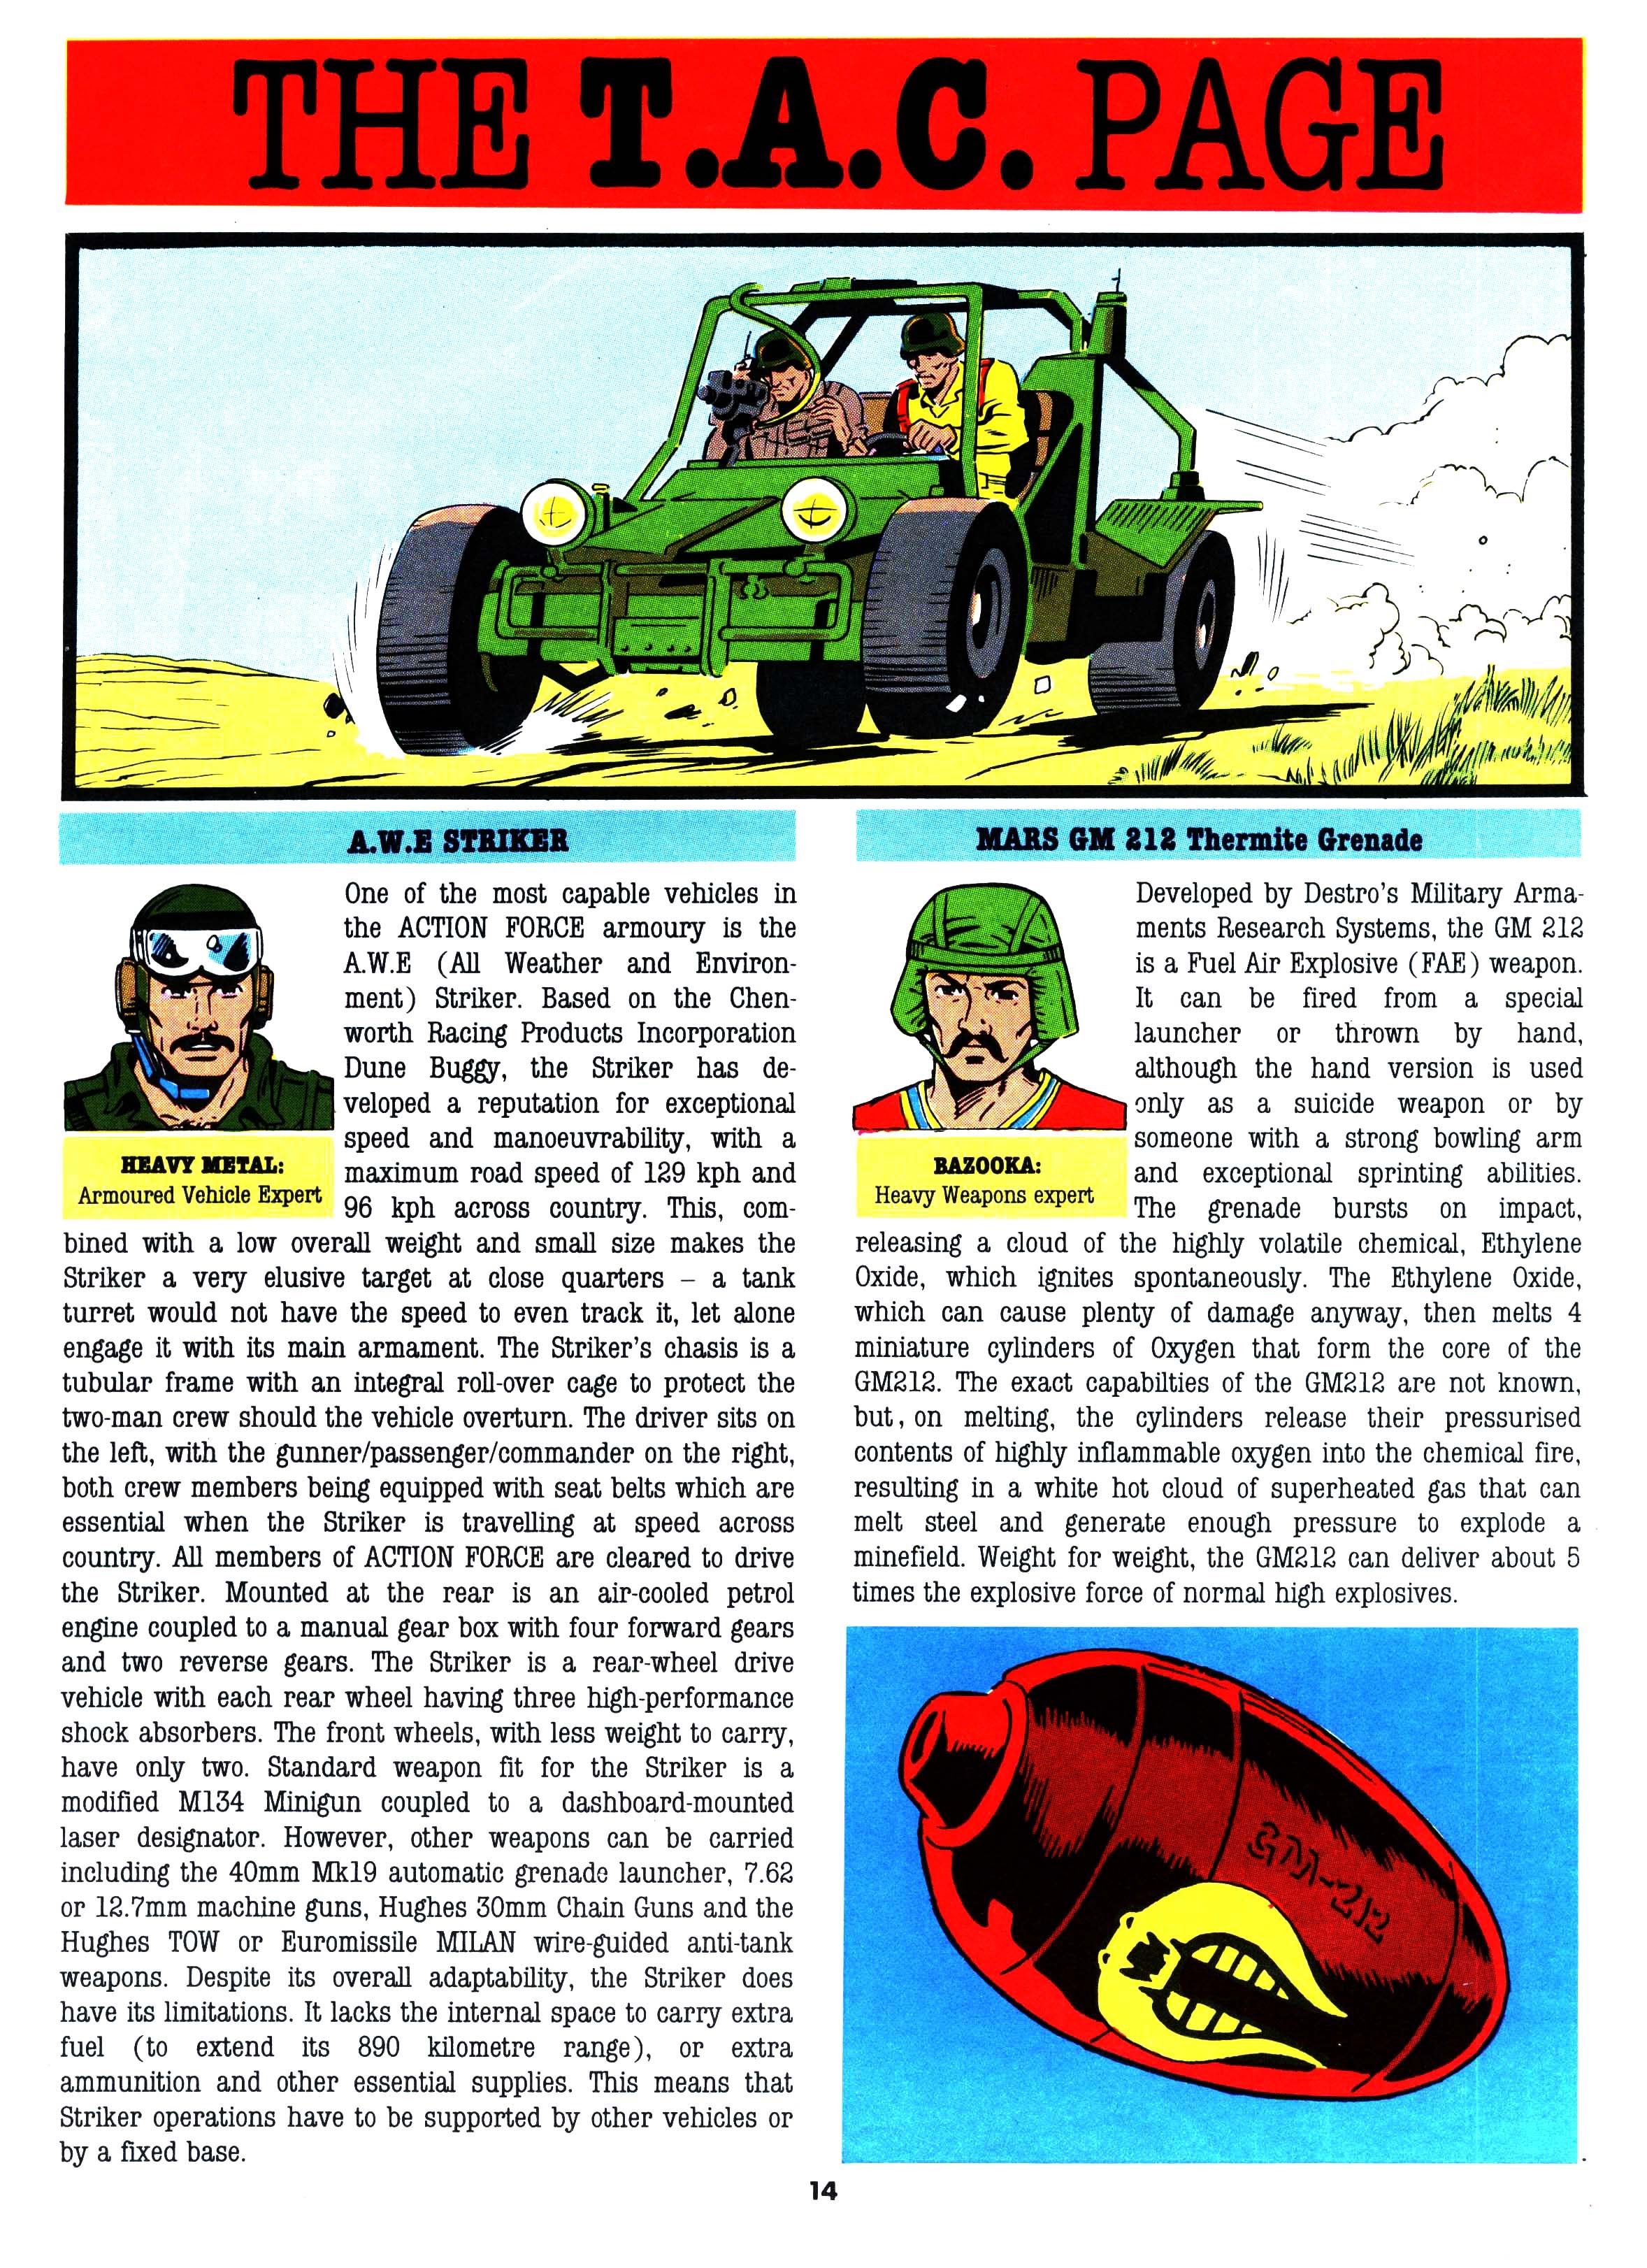 Read online Action Force comic -  Issue #17 - 14